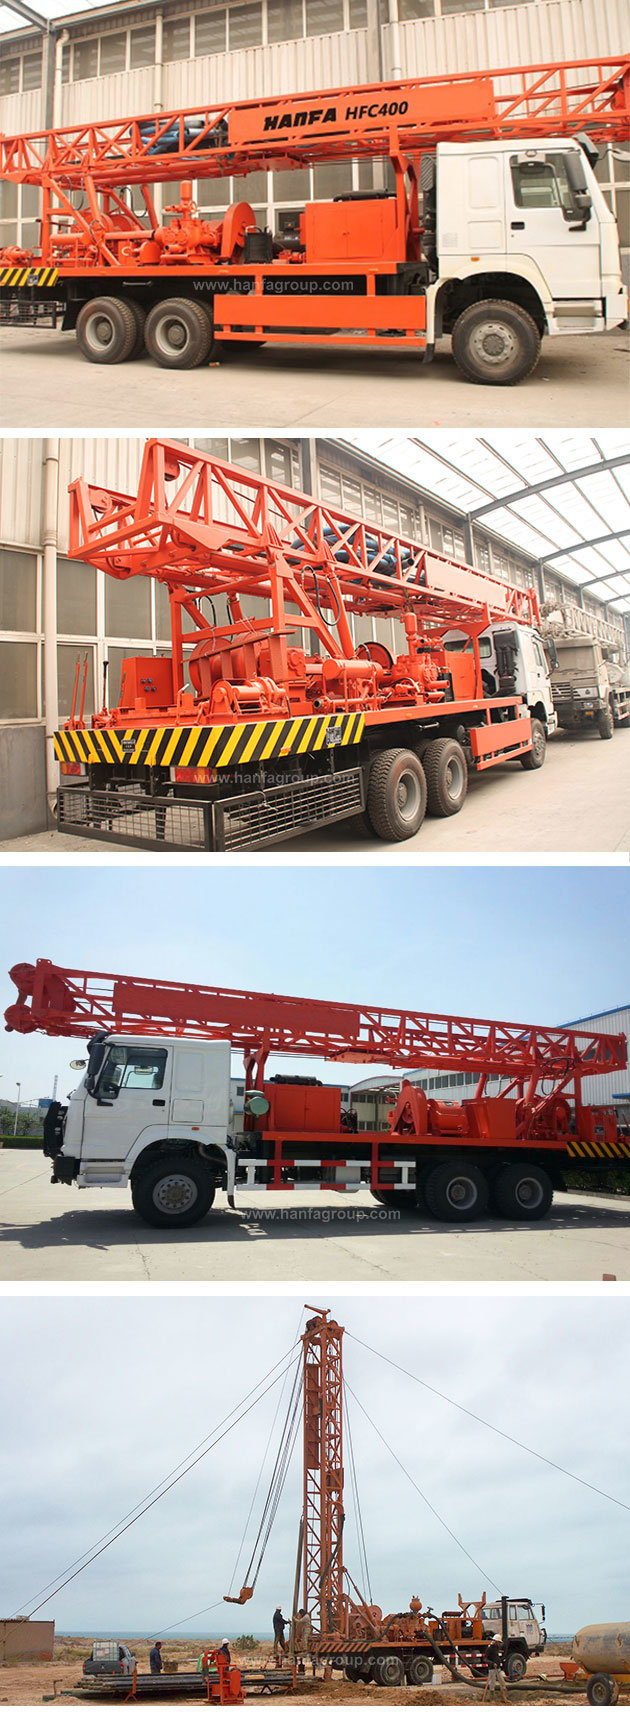 Latest Product Hfc-400 Truck-Mounted Water Well Drilling Rig